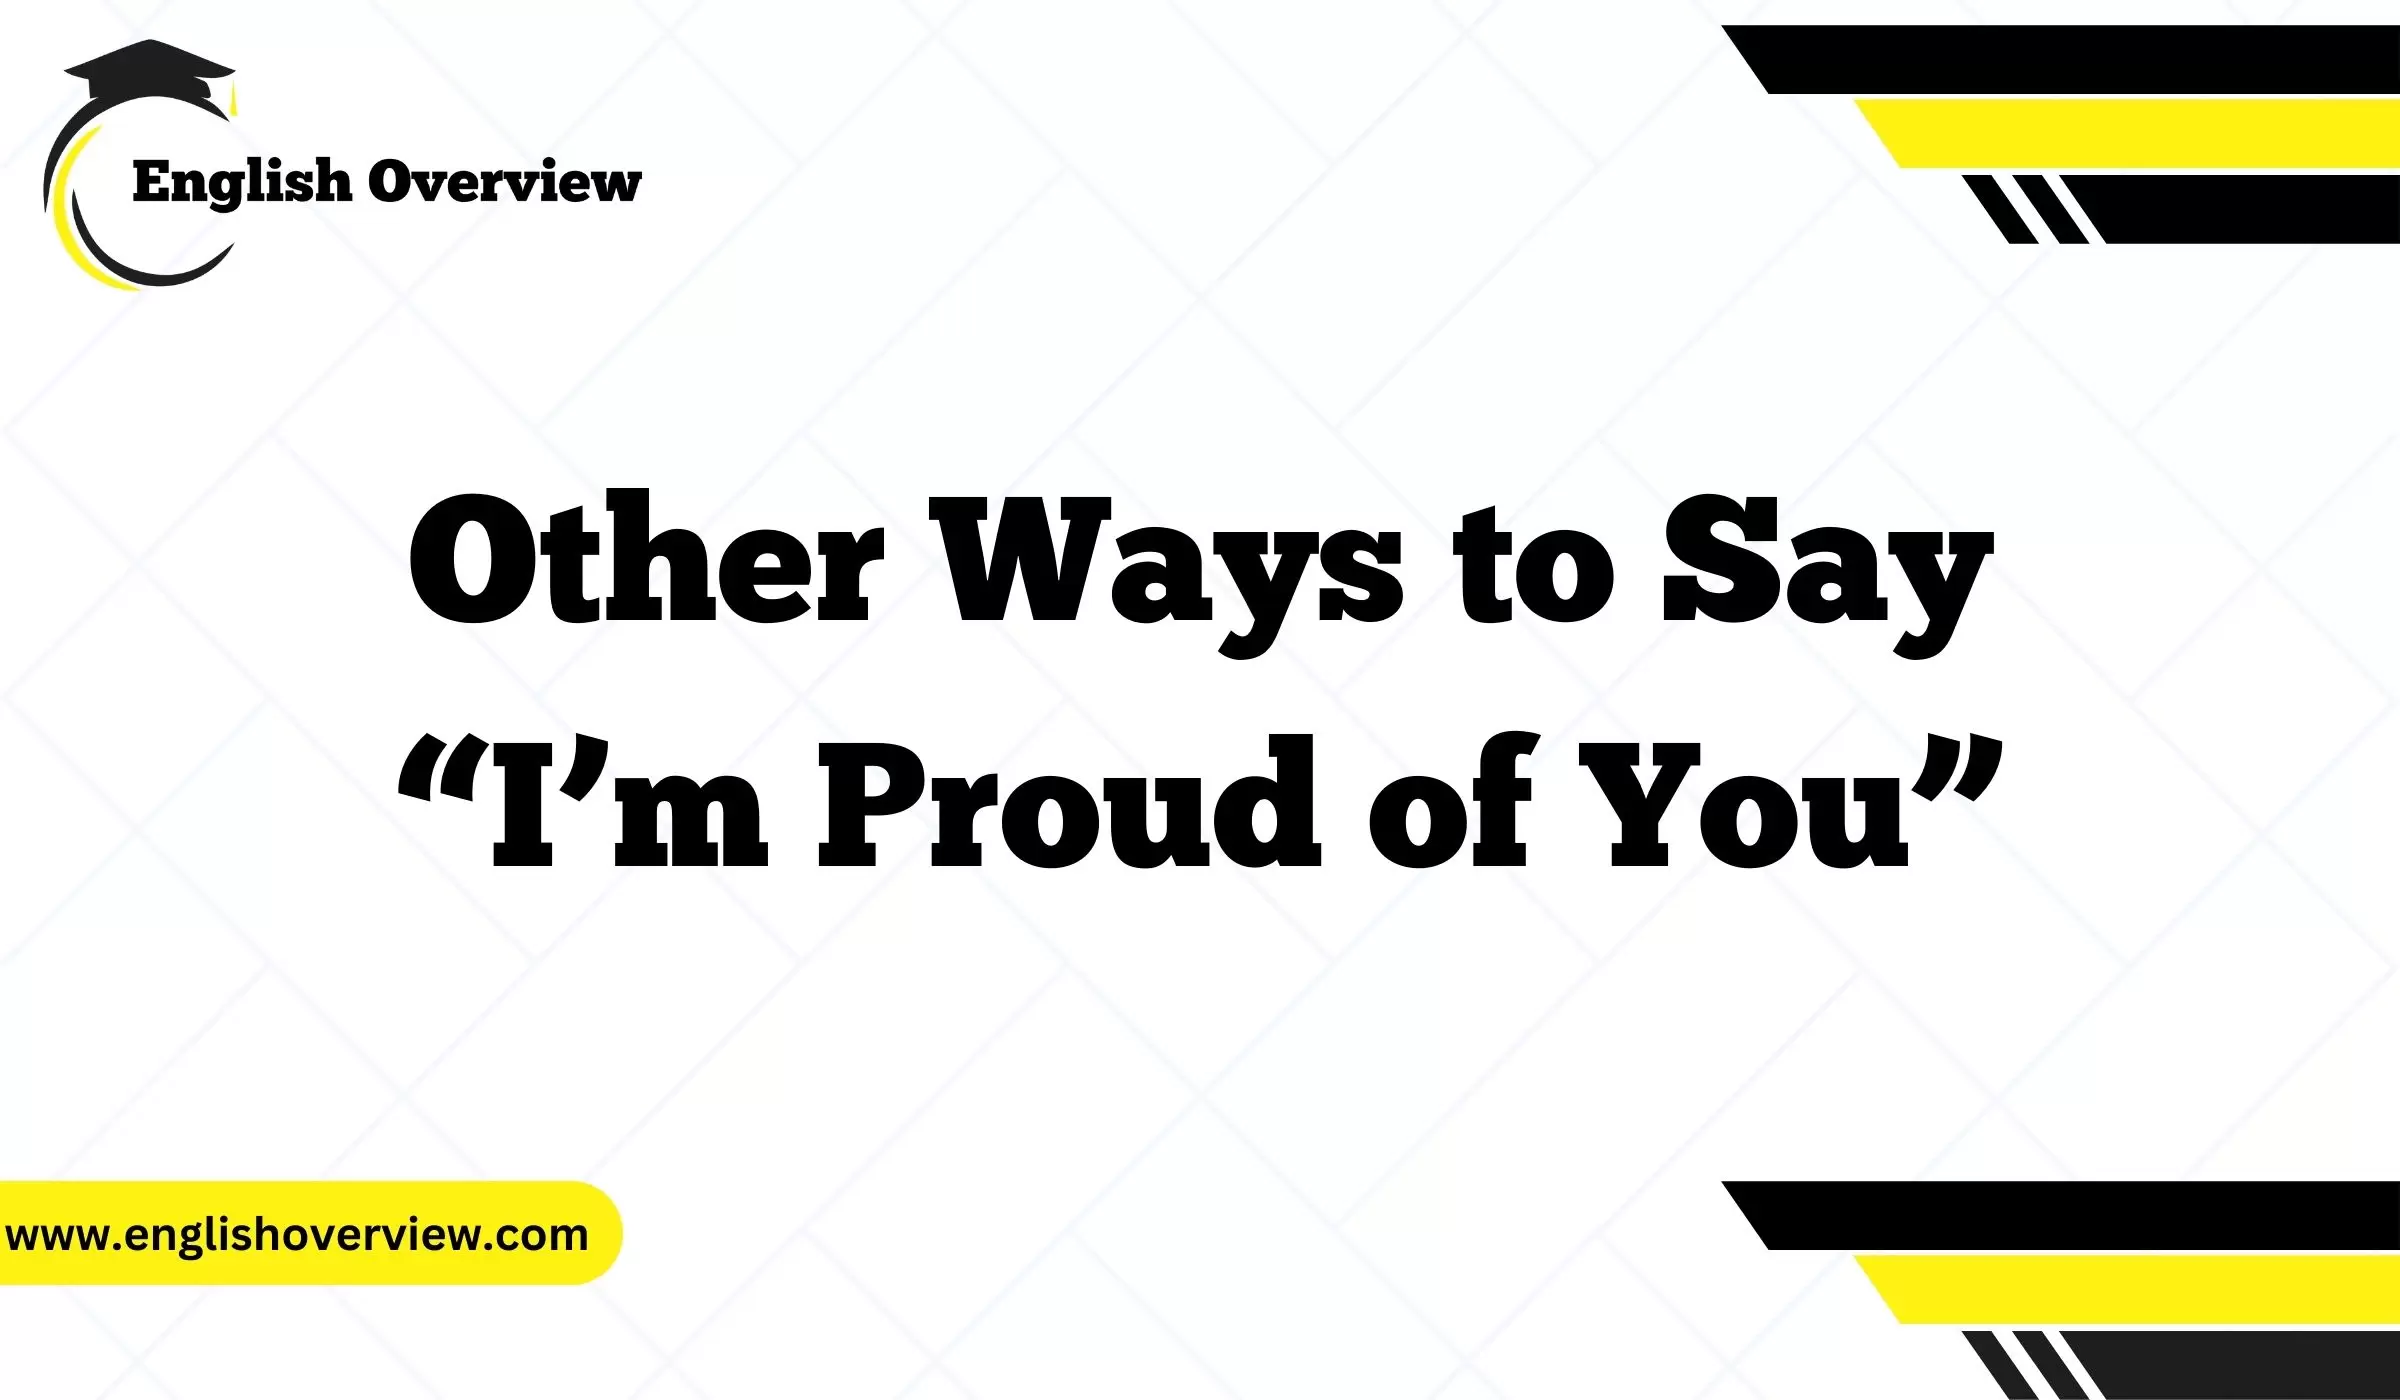 Other Ways to Say “I’m Proud of You”